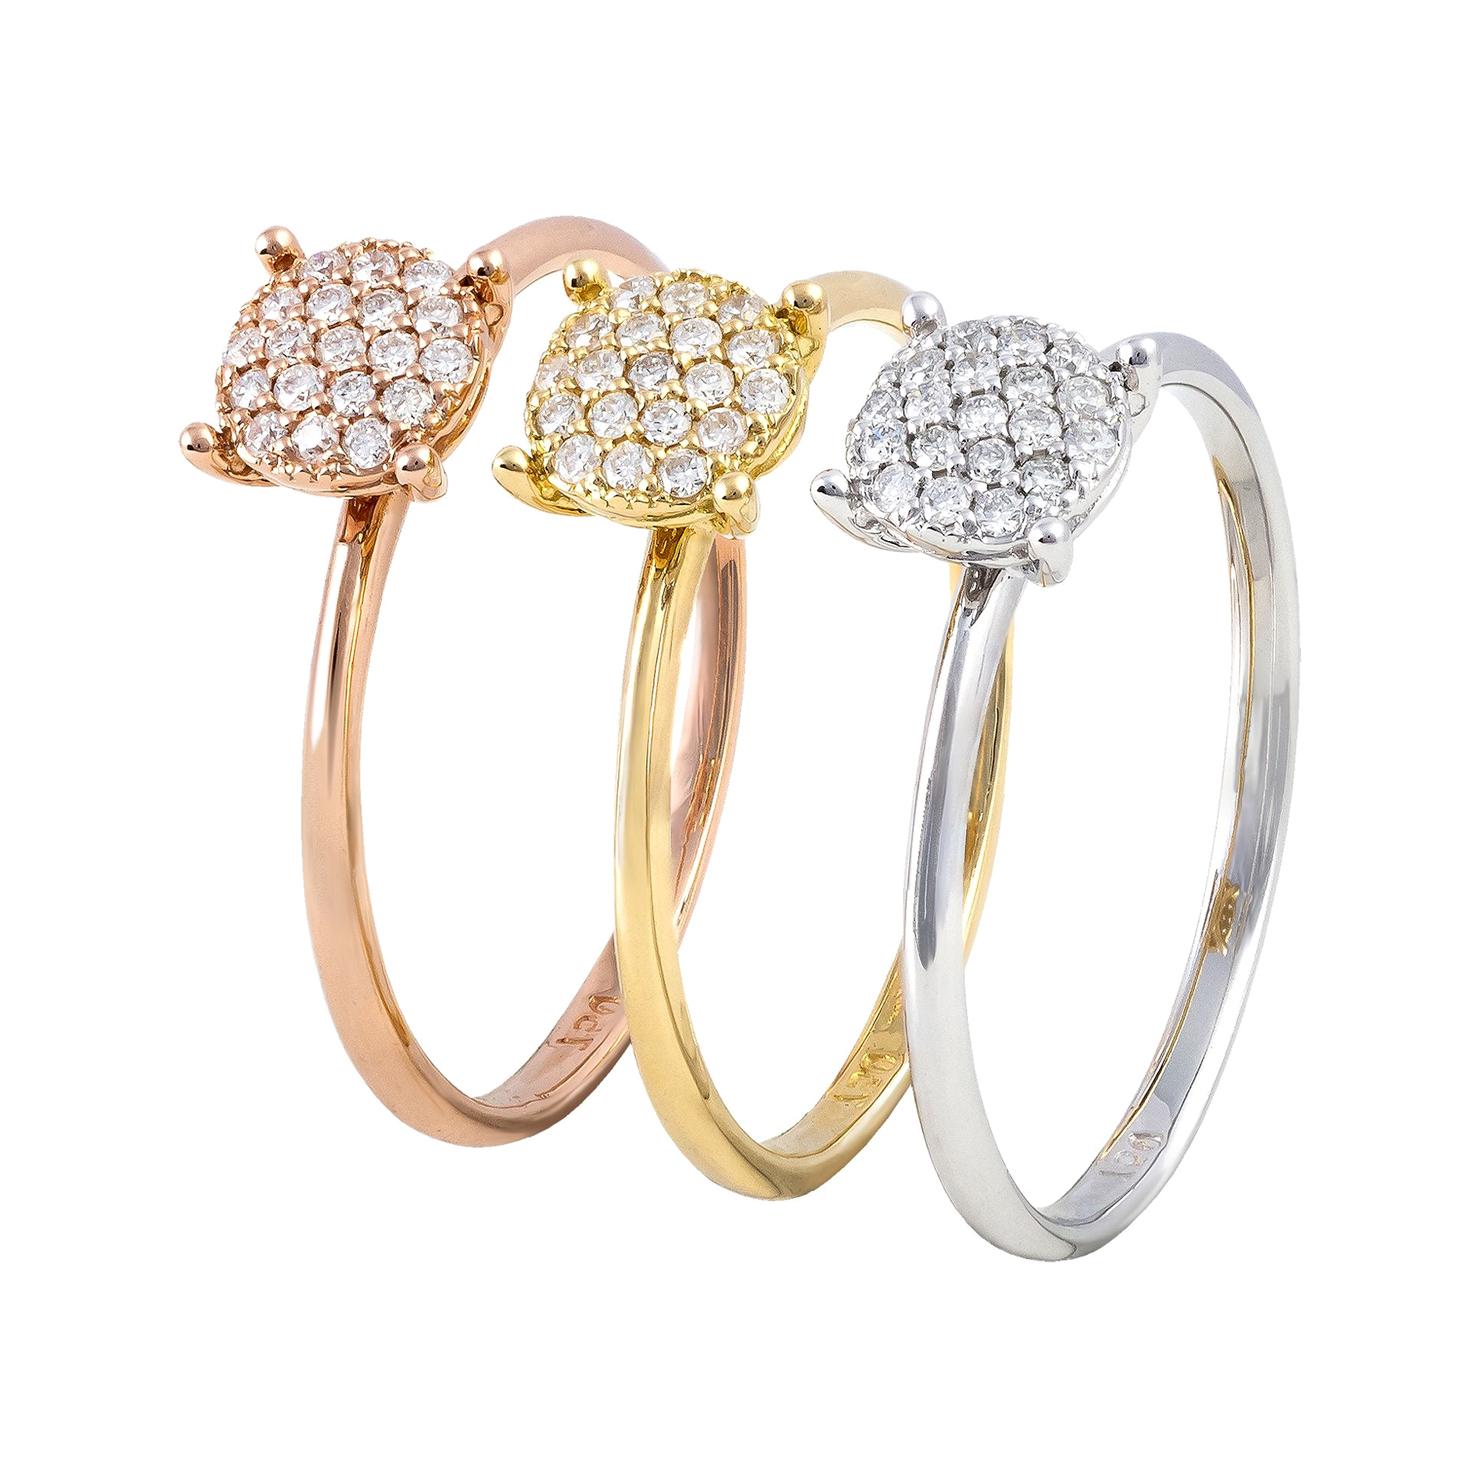 Set of 3 Diamond Rings 18K Rose, White and Yellow Gold Diamond for Her For Sale